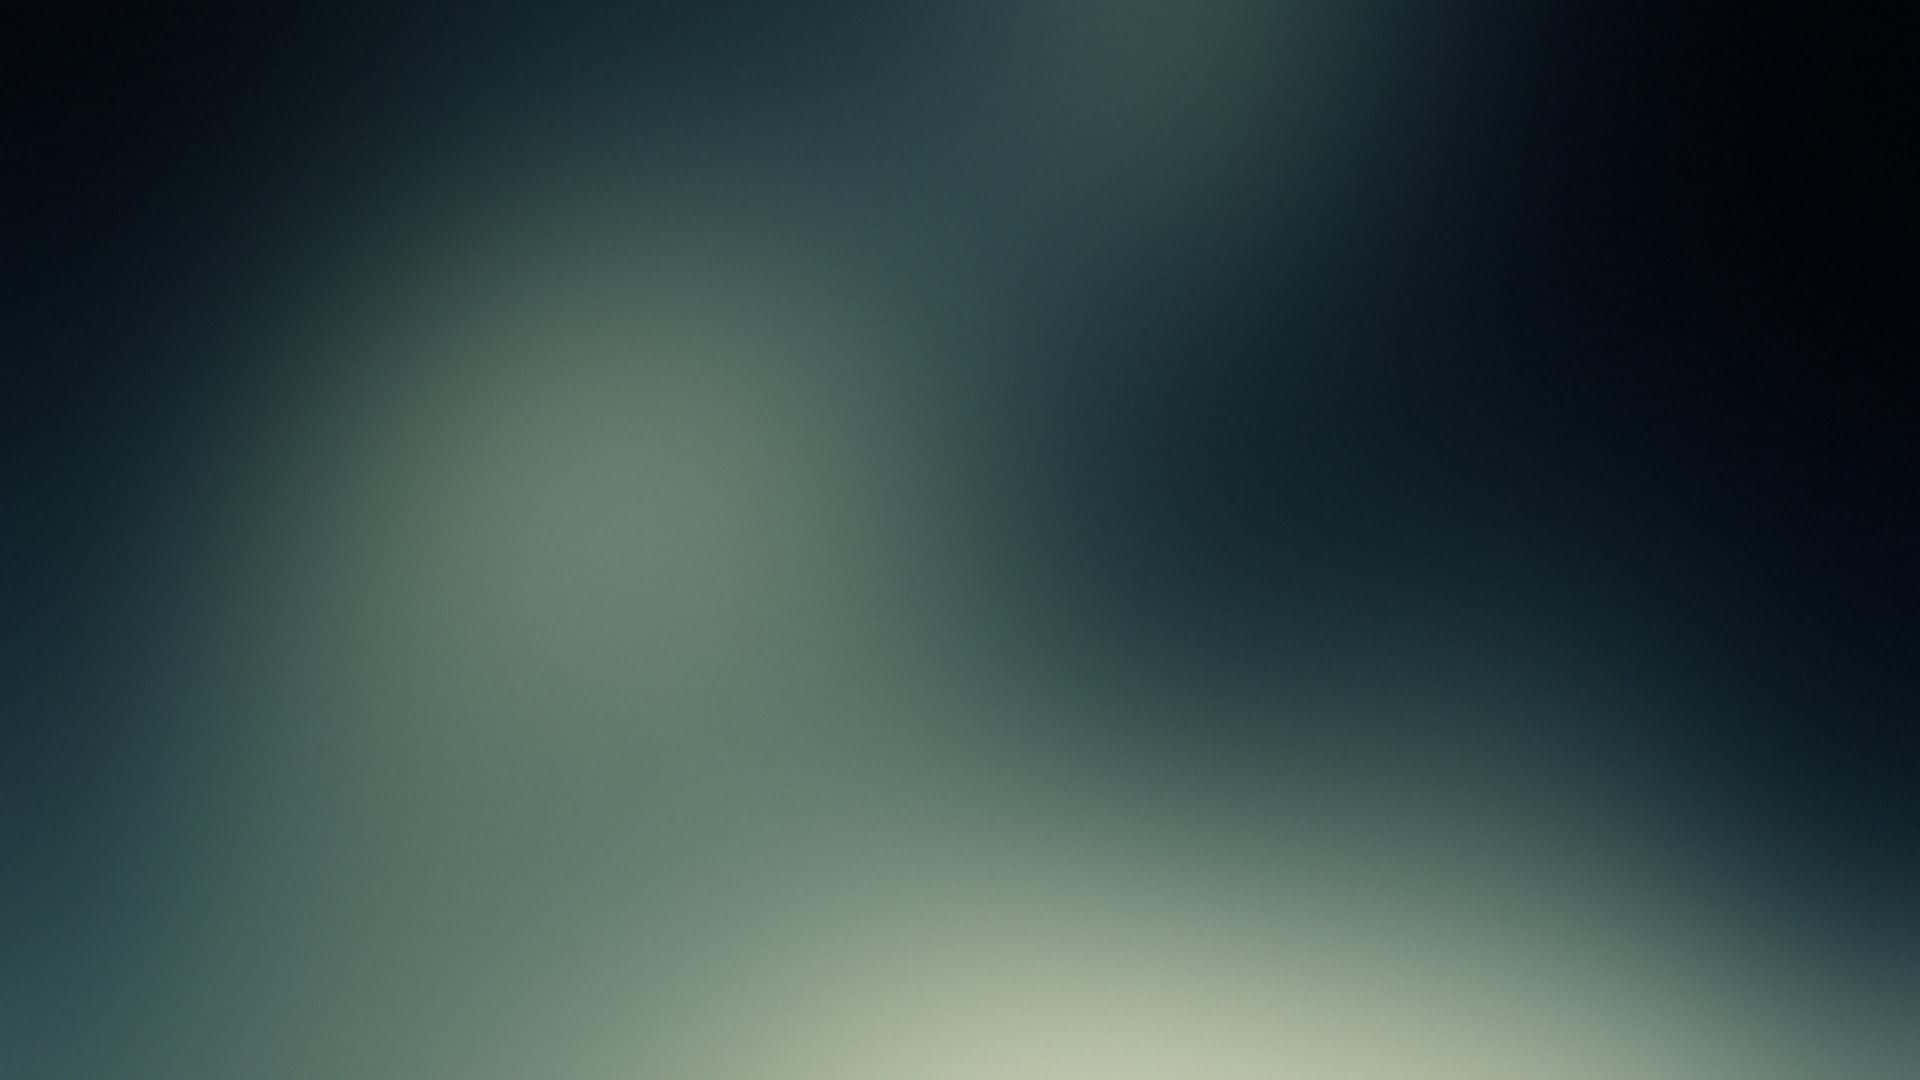 A Blurry Image Of A Green And Blue Iphone Wallpaper